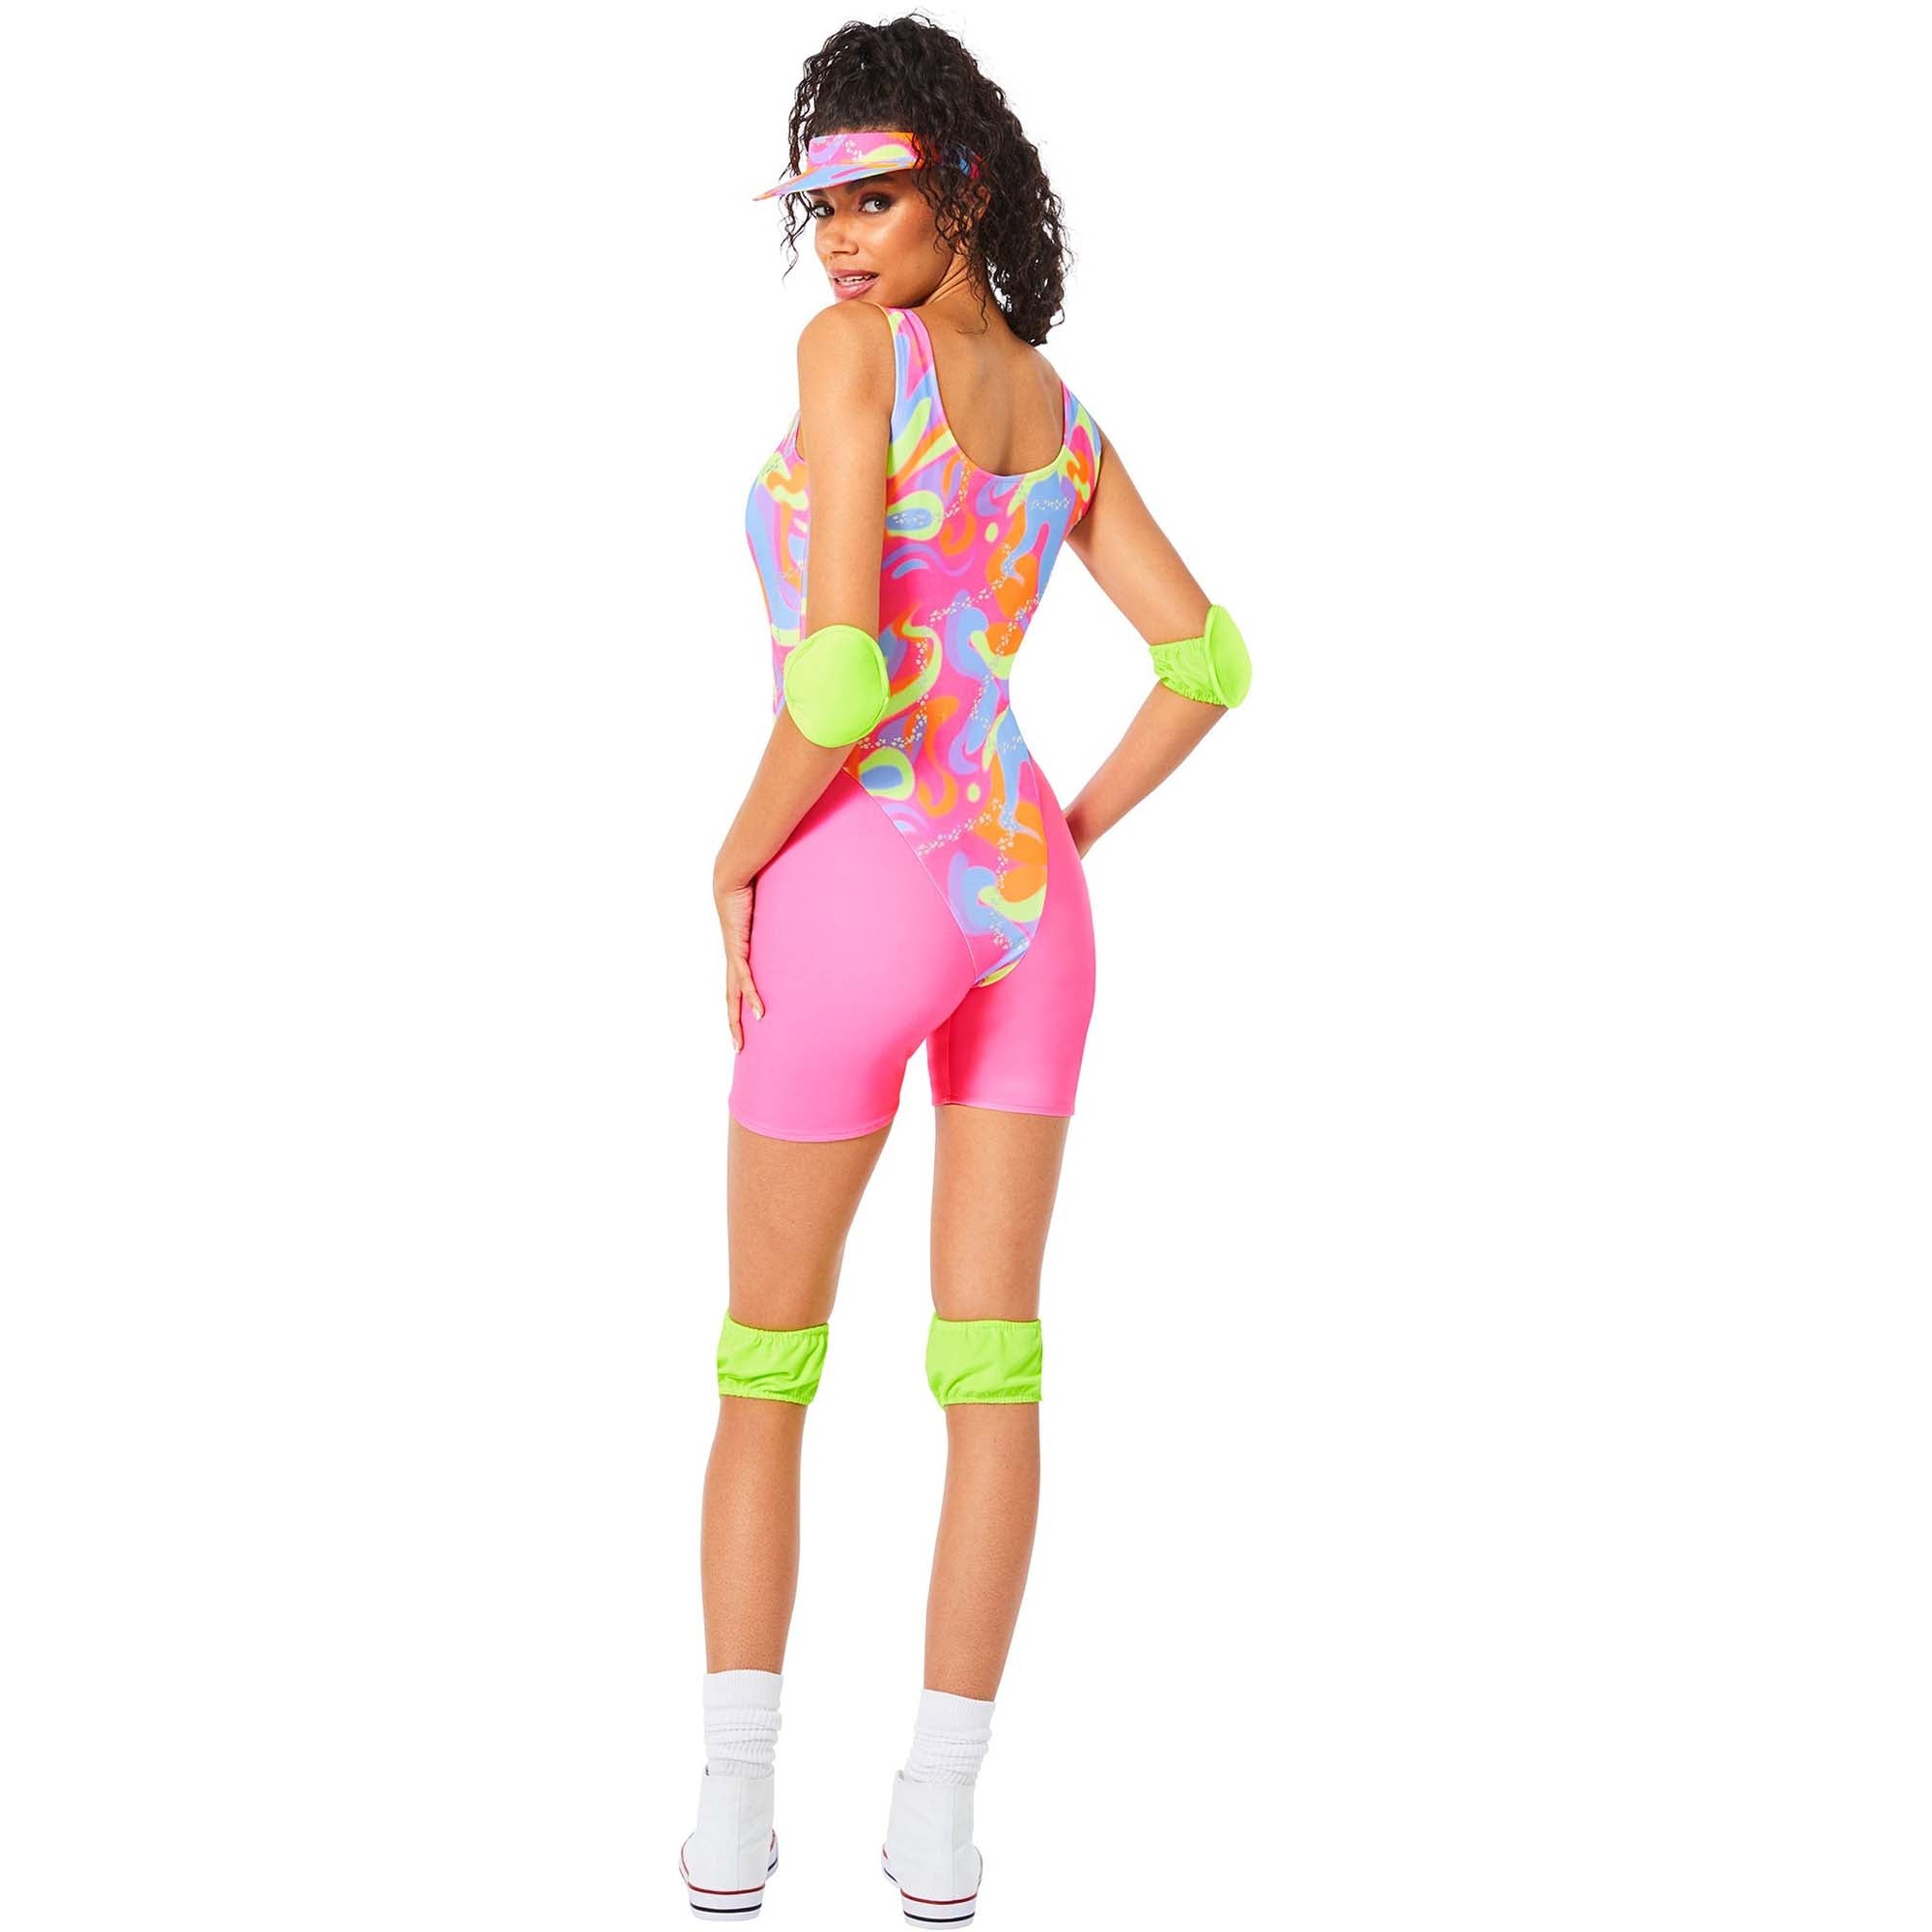 Spirit Halloween Barbie the Movie Adult Skating Barbie Costume | Officially  Licensed | Mattel | Skating Outfit